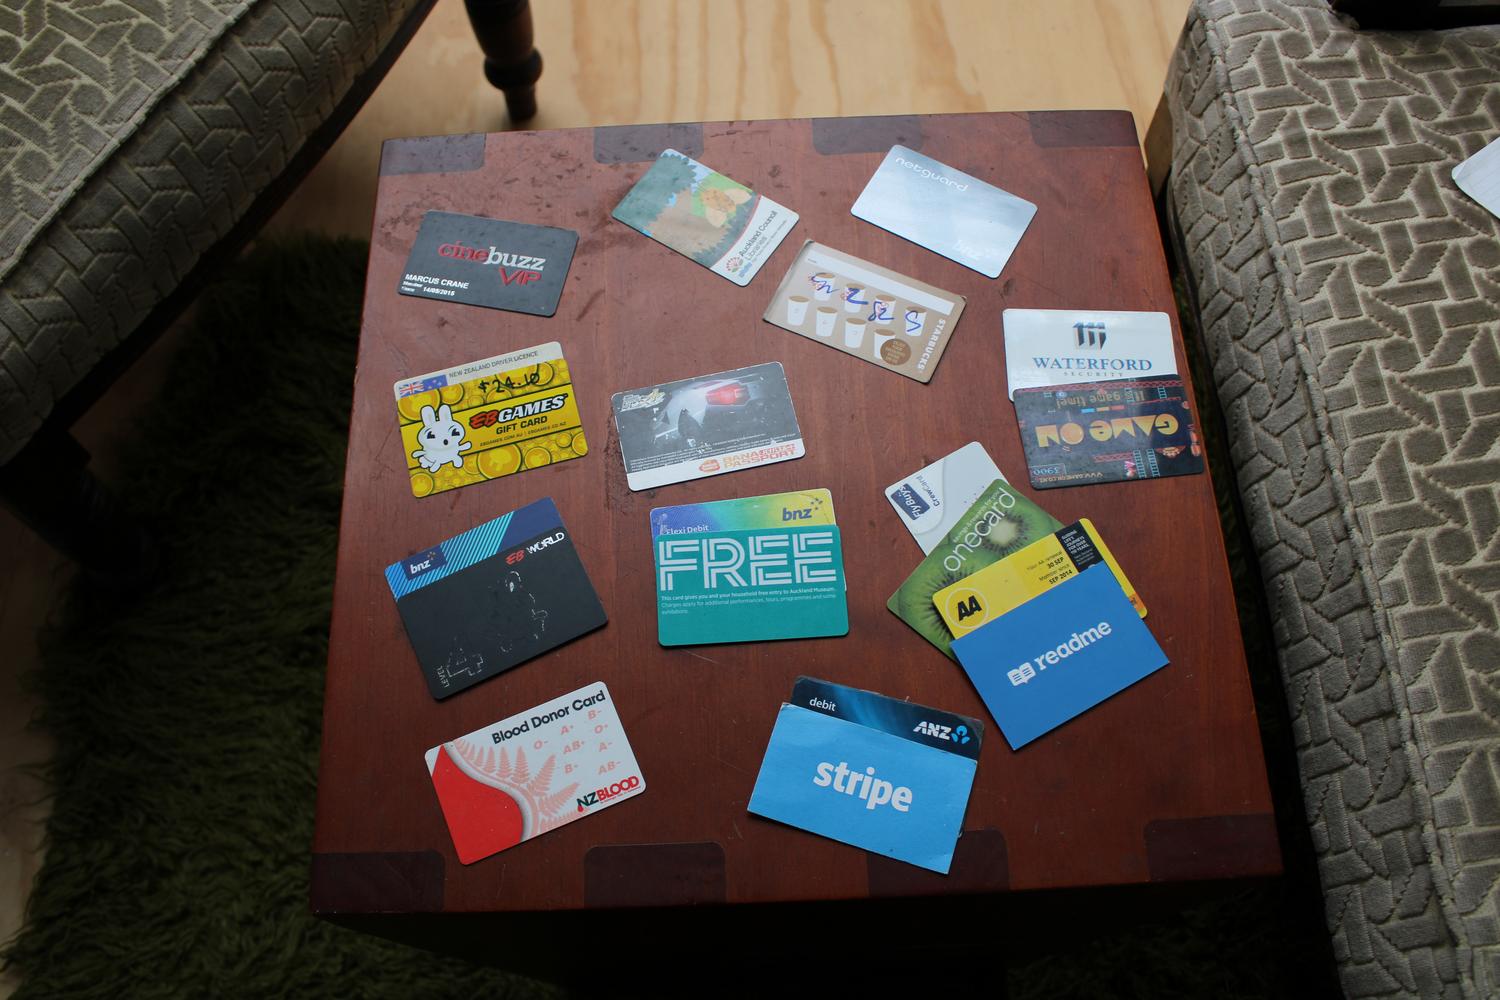 An aerial photo of a table with numerous cards scattered around. There are different types from loyalty cards to business cards, as described below.